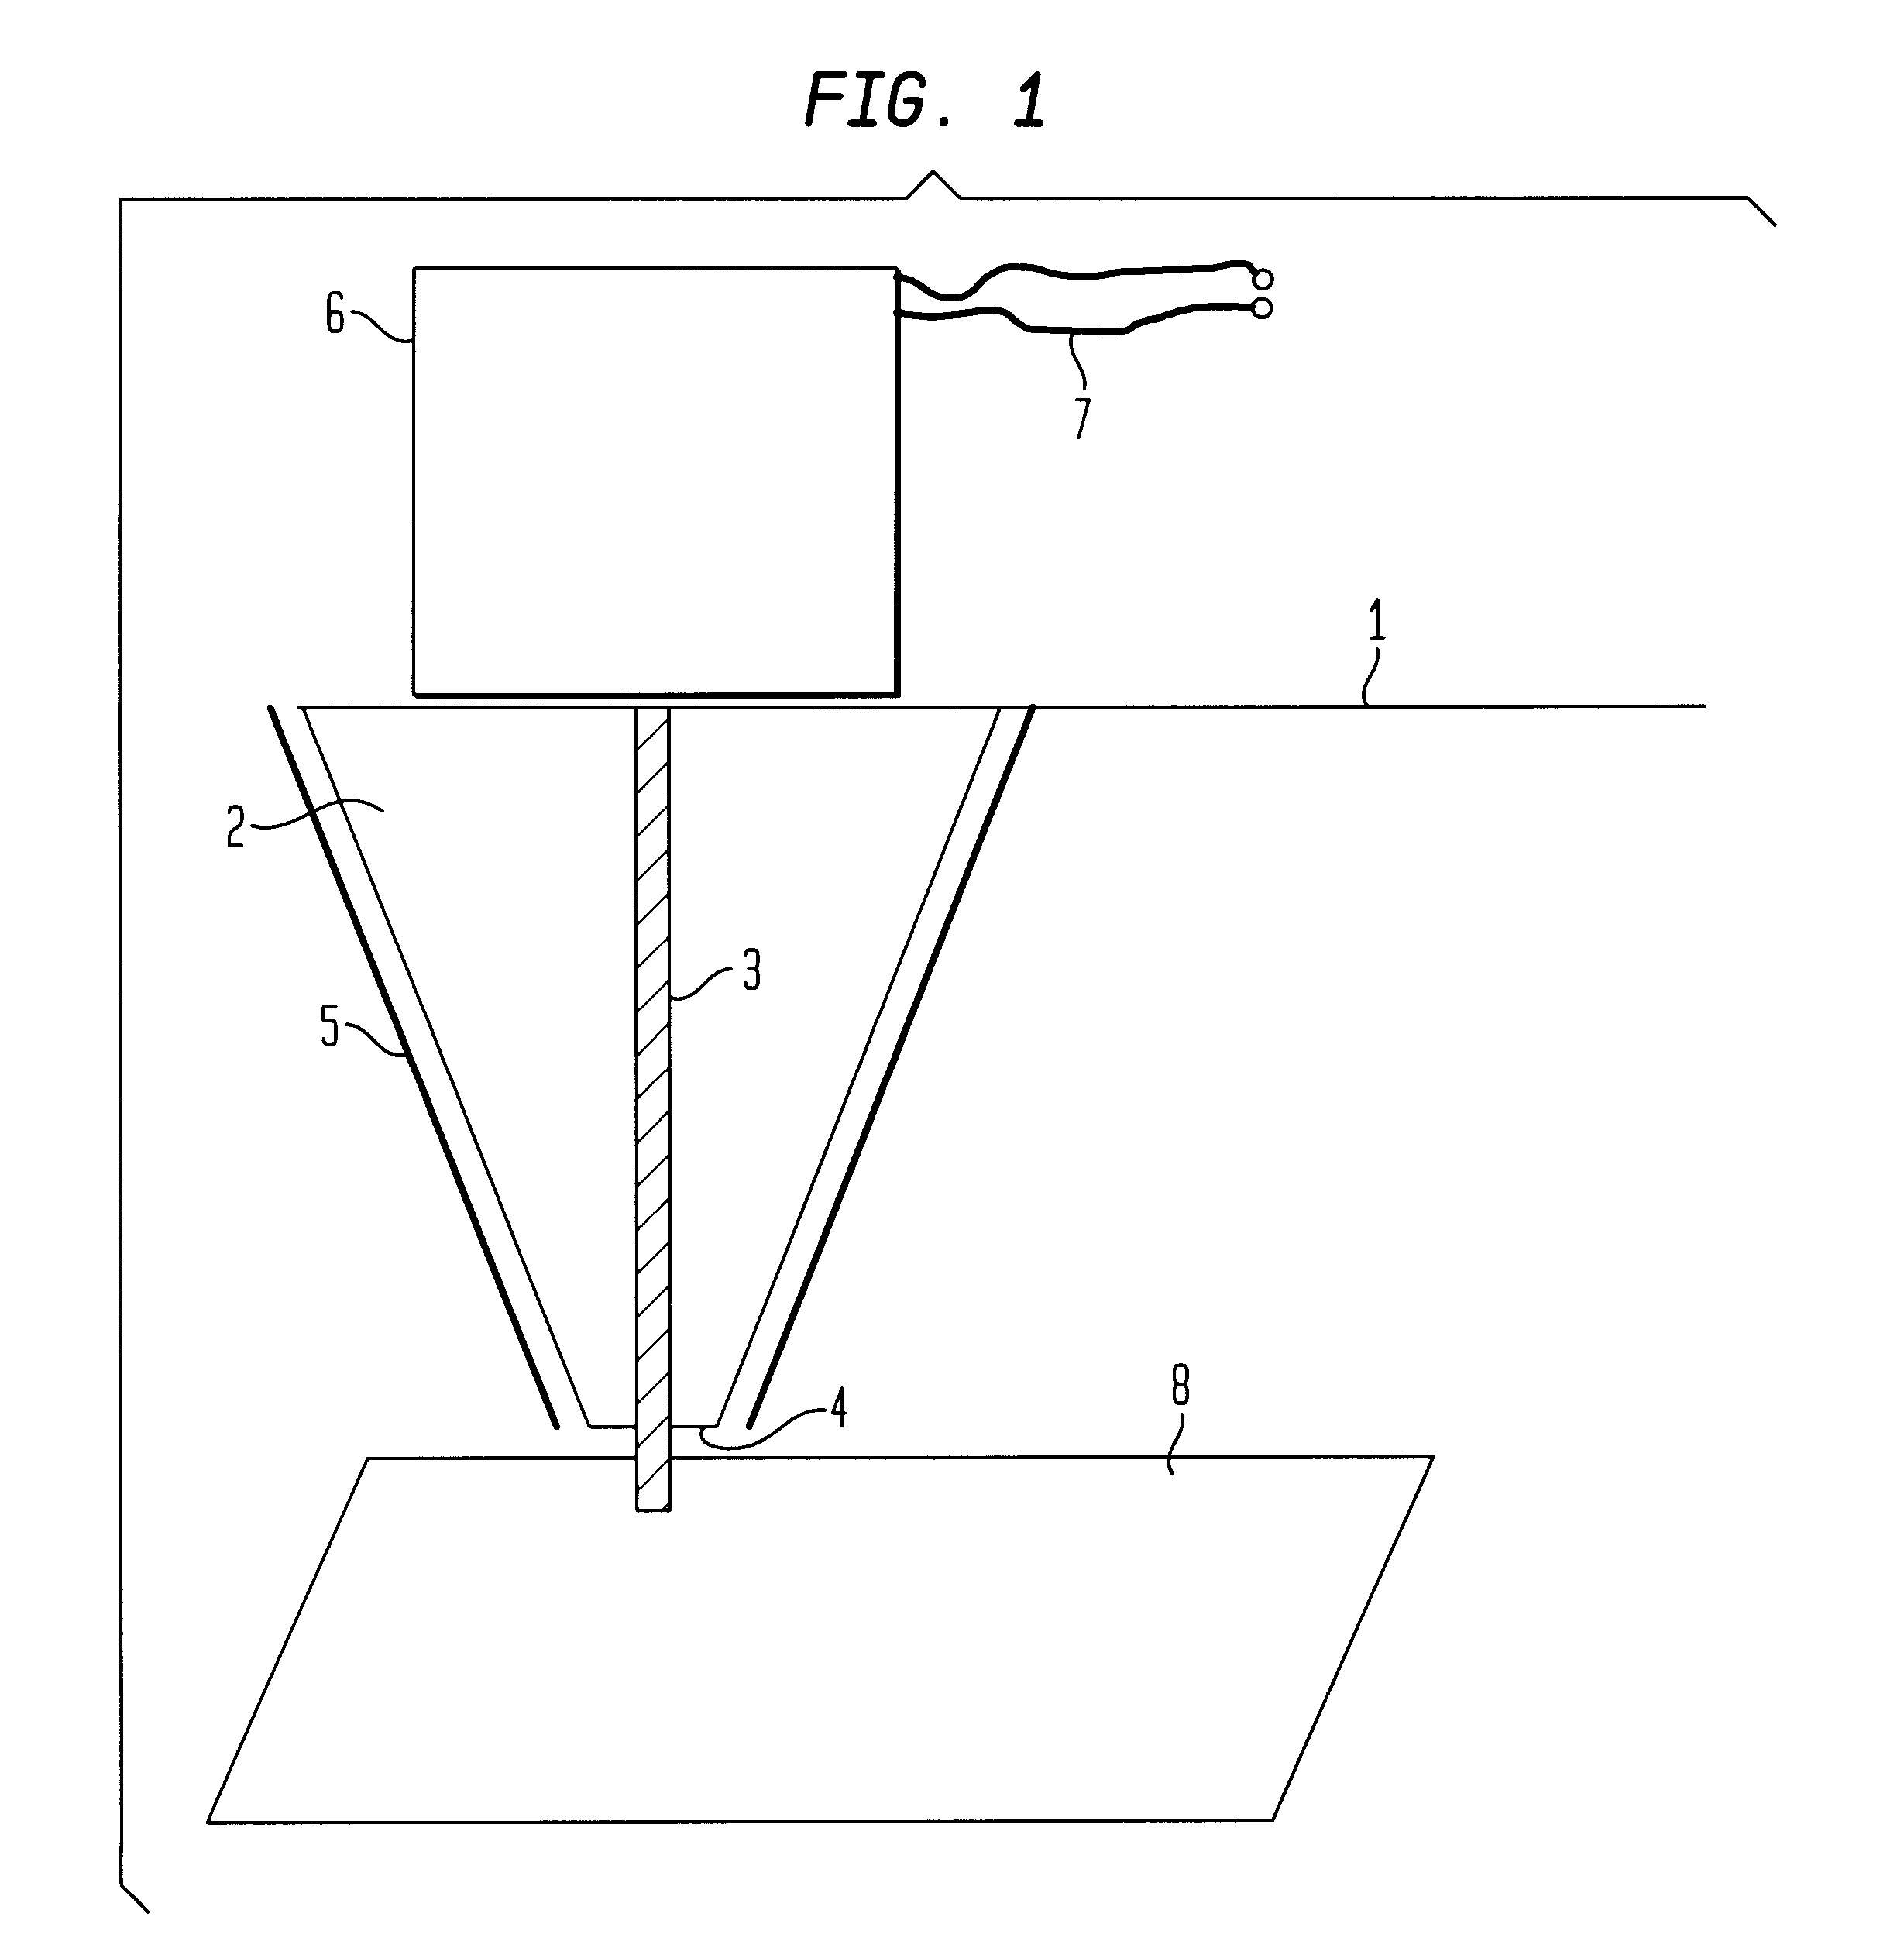 Apparatus for use in magnetic-field detection and generation devices